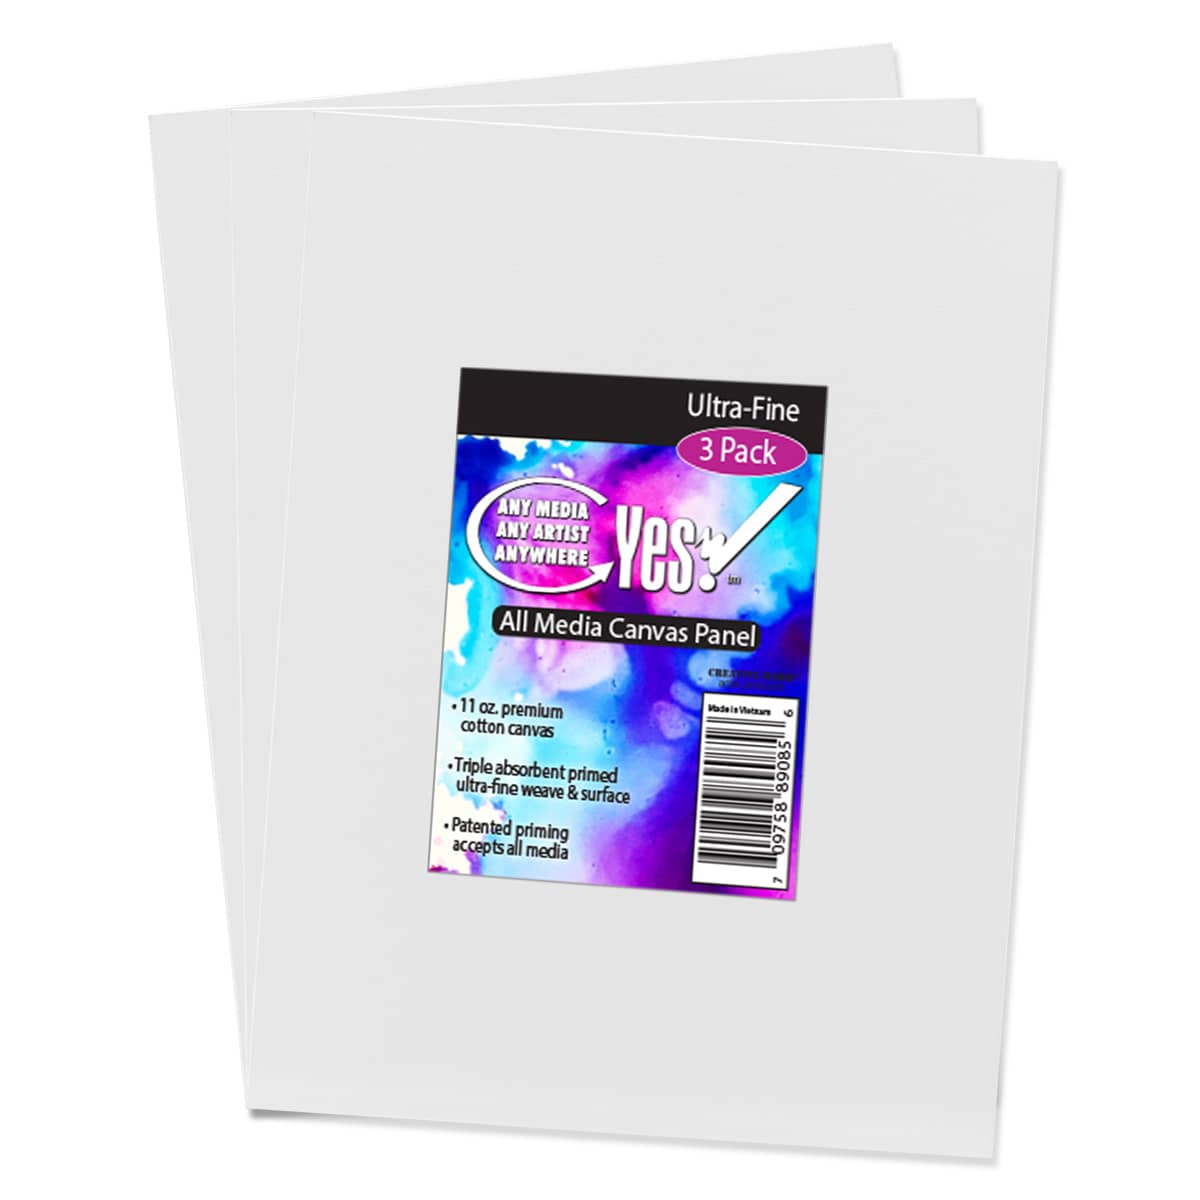 Yes! All Media Cotton Canvas Panels - 3 Packs